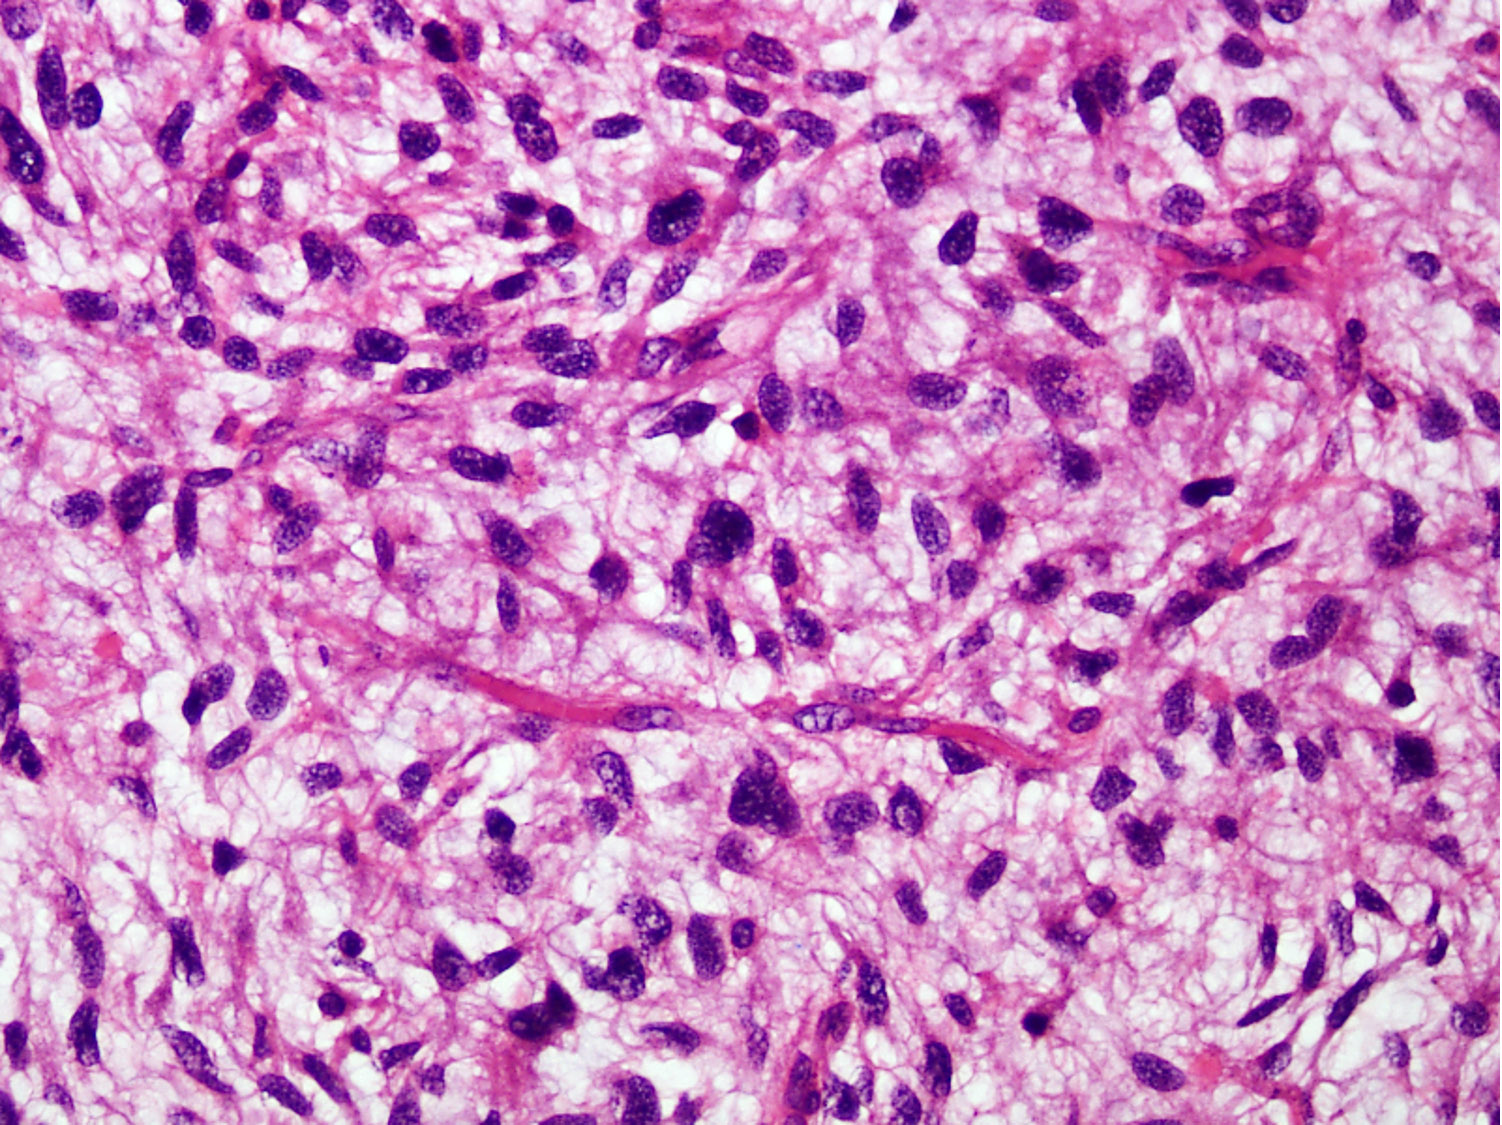 Hyperchromatic atypical spindle cells